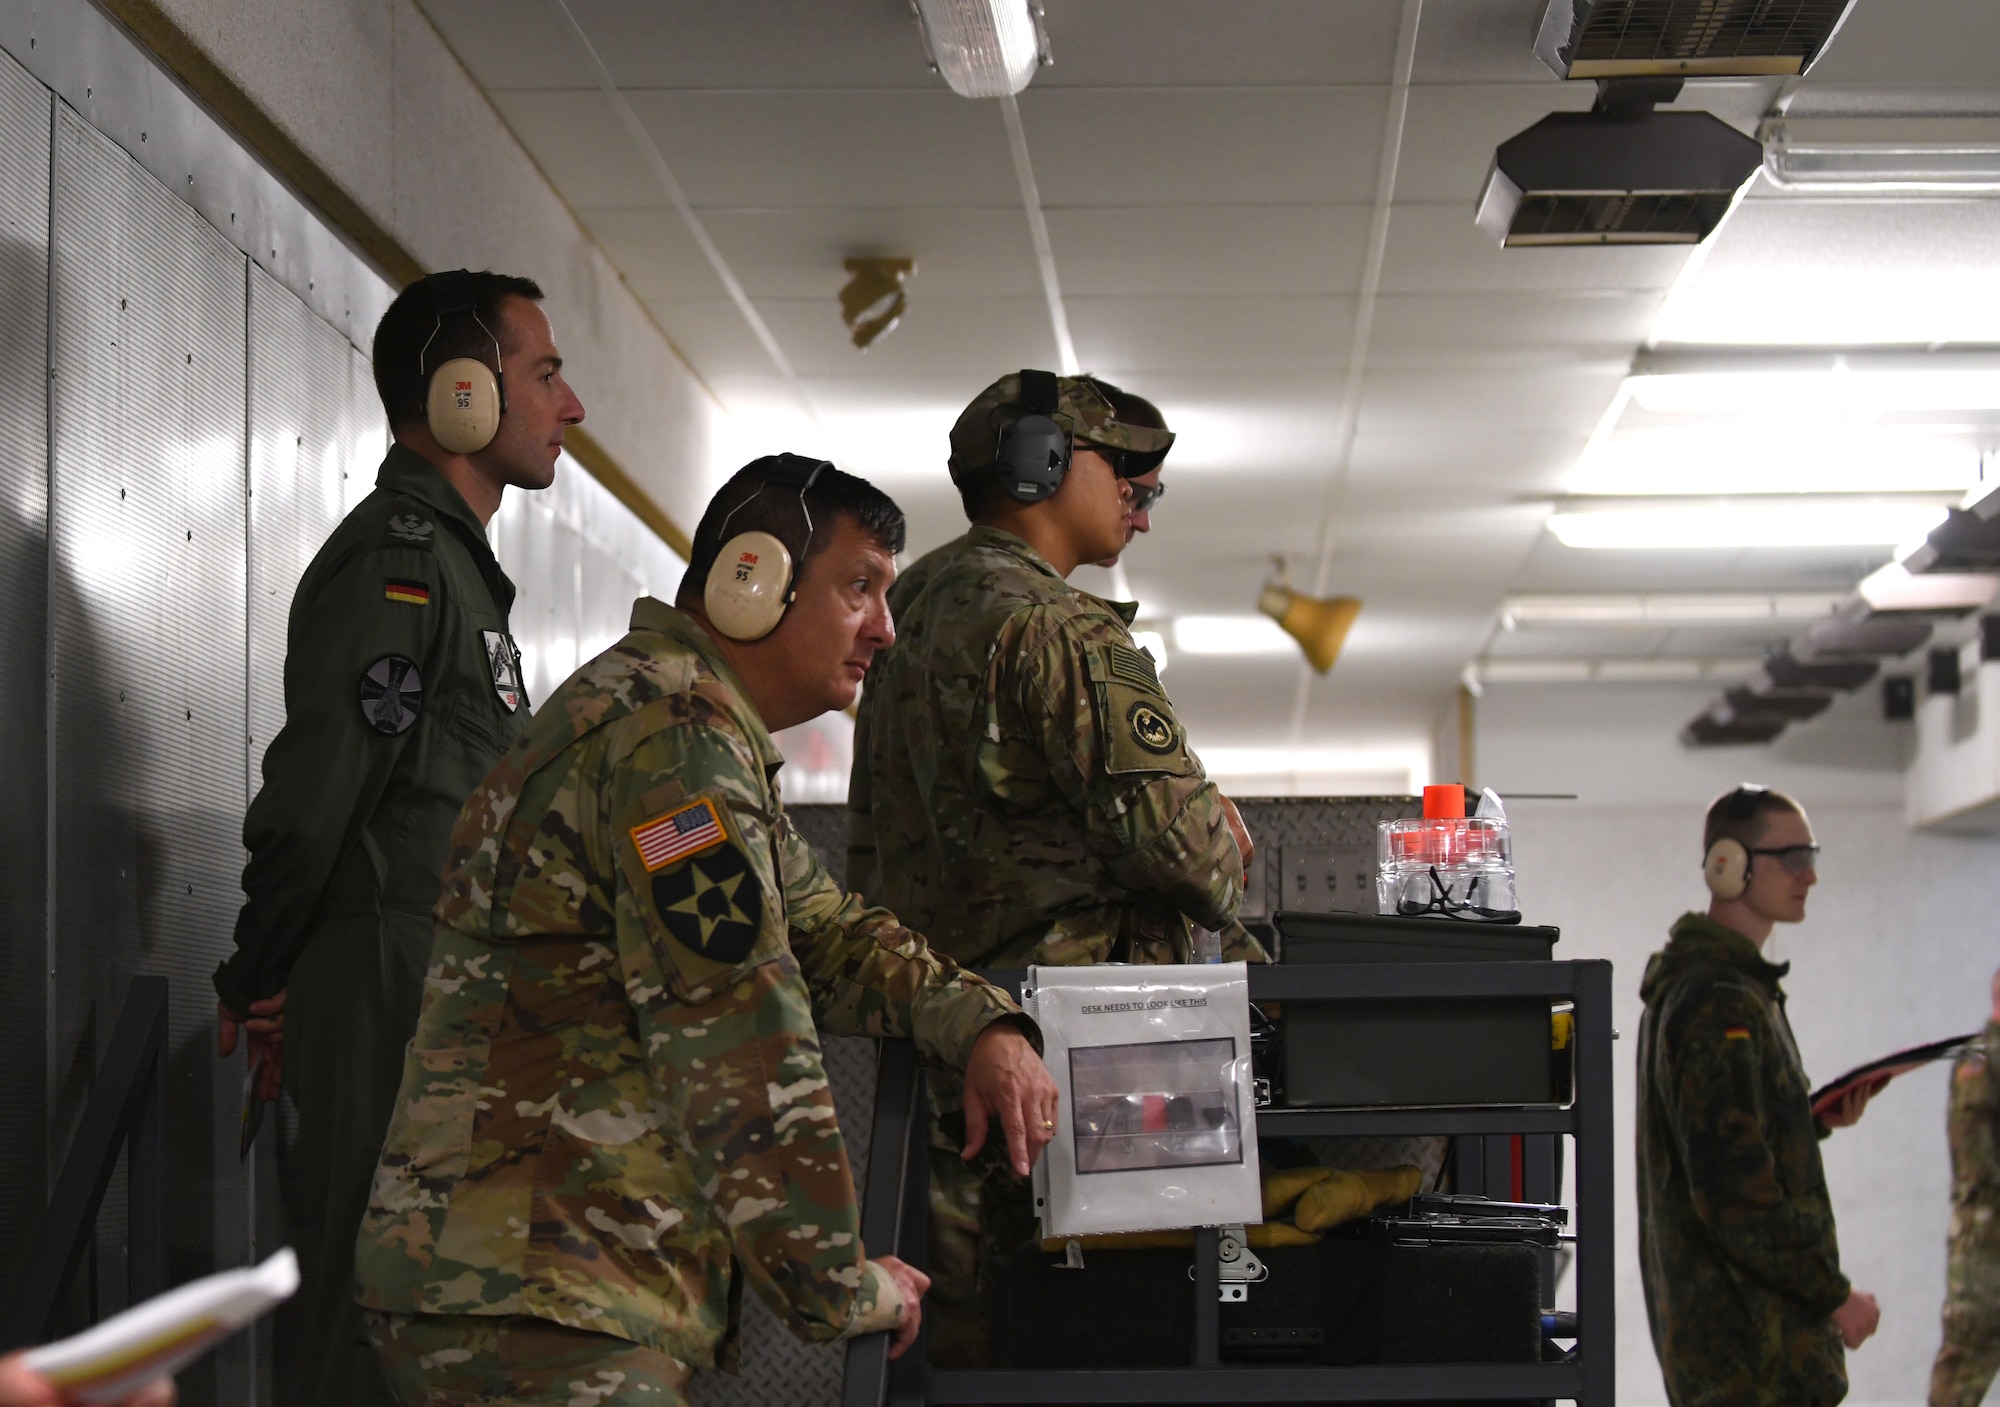 Lt. Col. Elvis Coronado, the South Dakota School of Mines and Technology military department chair, stands alongside a German officer at the Combat Arms and Maintenance facility at Ellsworth Air Force Base, S.D., Sept. 21, 2019. Eleven Ellsworth Airmen participated in the German Armed Forces Proficiency Test alongside South Dakota Army National Guardsmen and Army ROTC cadets. Participants had to complete six events in order to qualify for the coveted German Armed Forces Proficiency Badge. (U.S. Air Force photo by Airman 1st Class Christina Bennett)